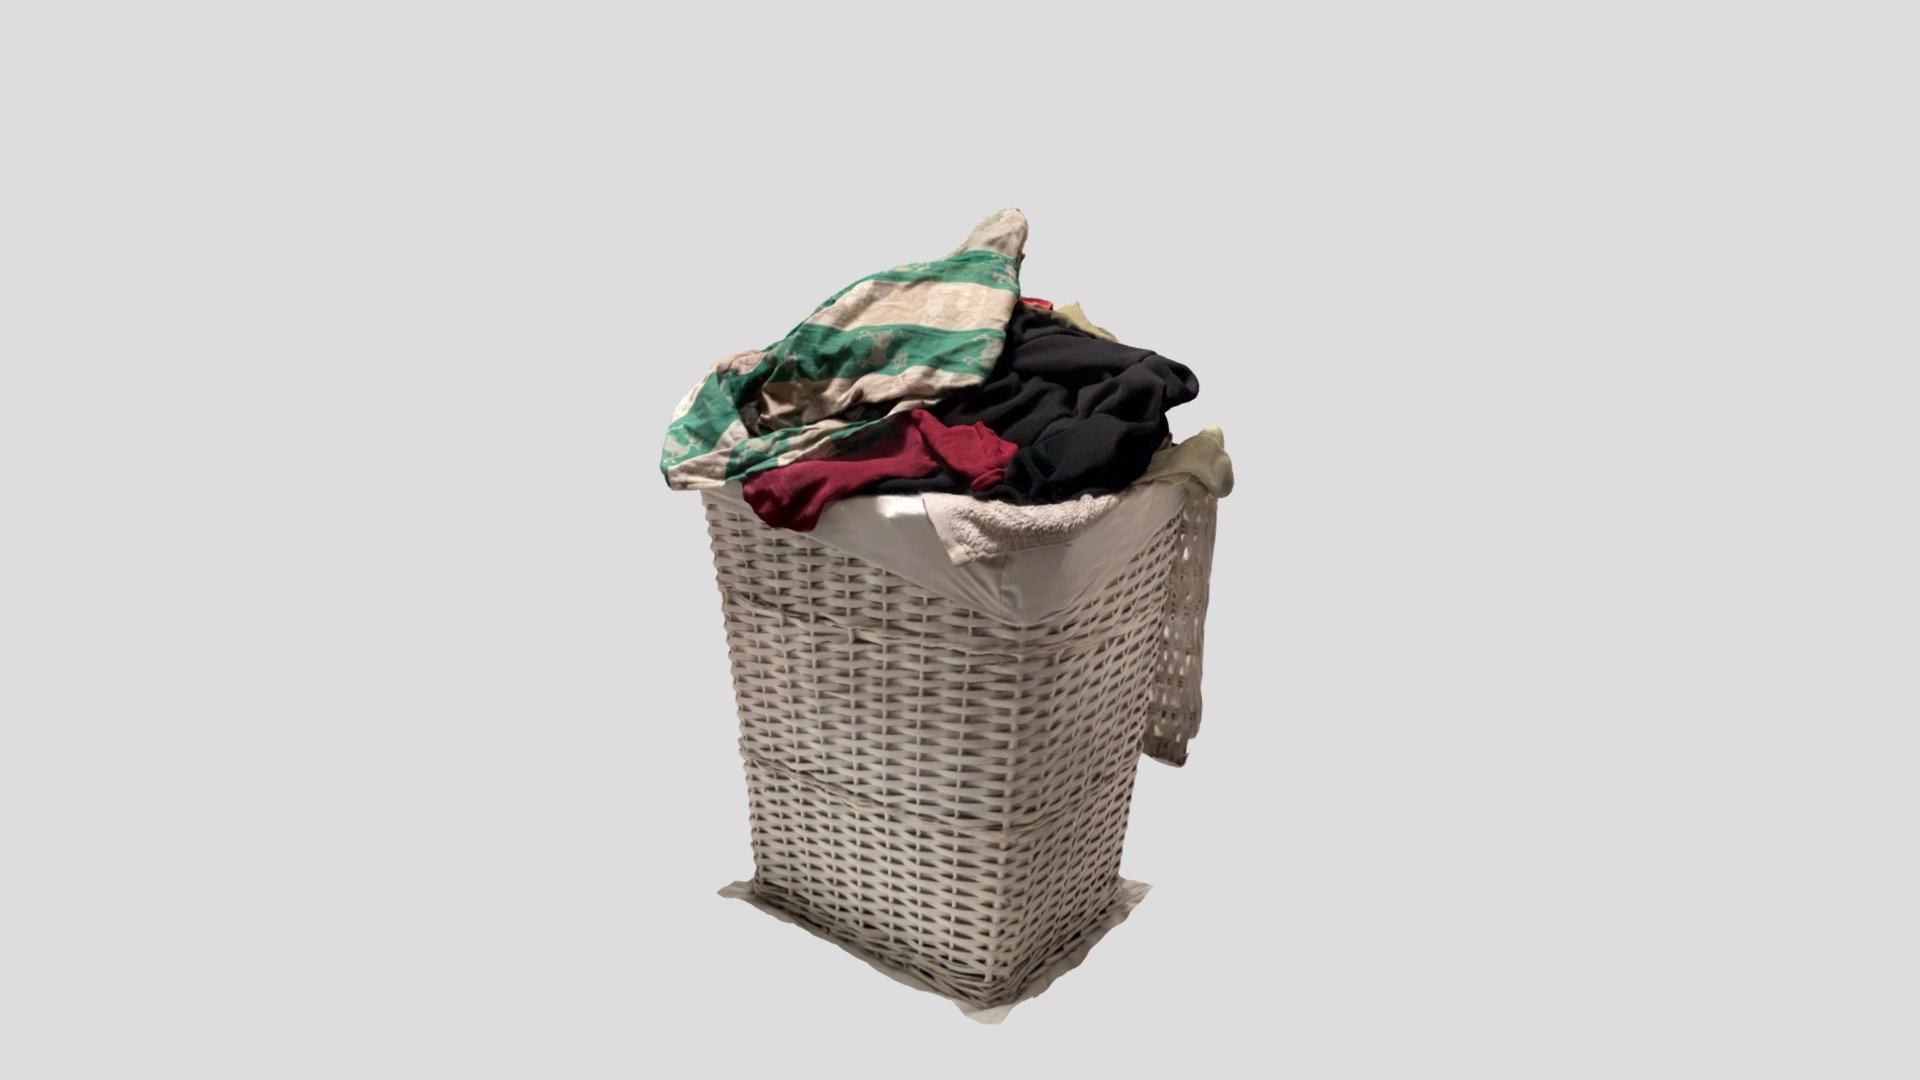 Laundry basket full of dirty clothes

Created with Polycam - Laundry basket - Download Free 3D model by Karolisbutenas 3d model